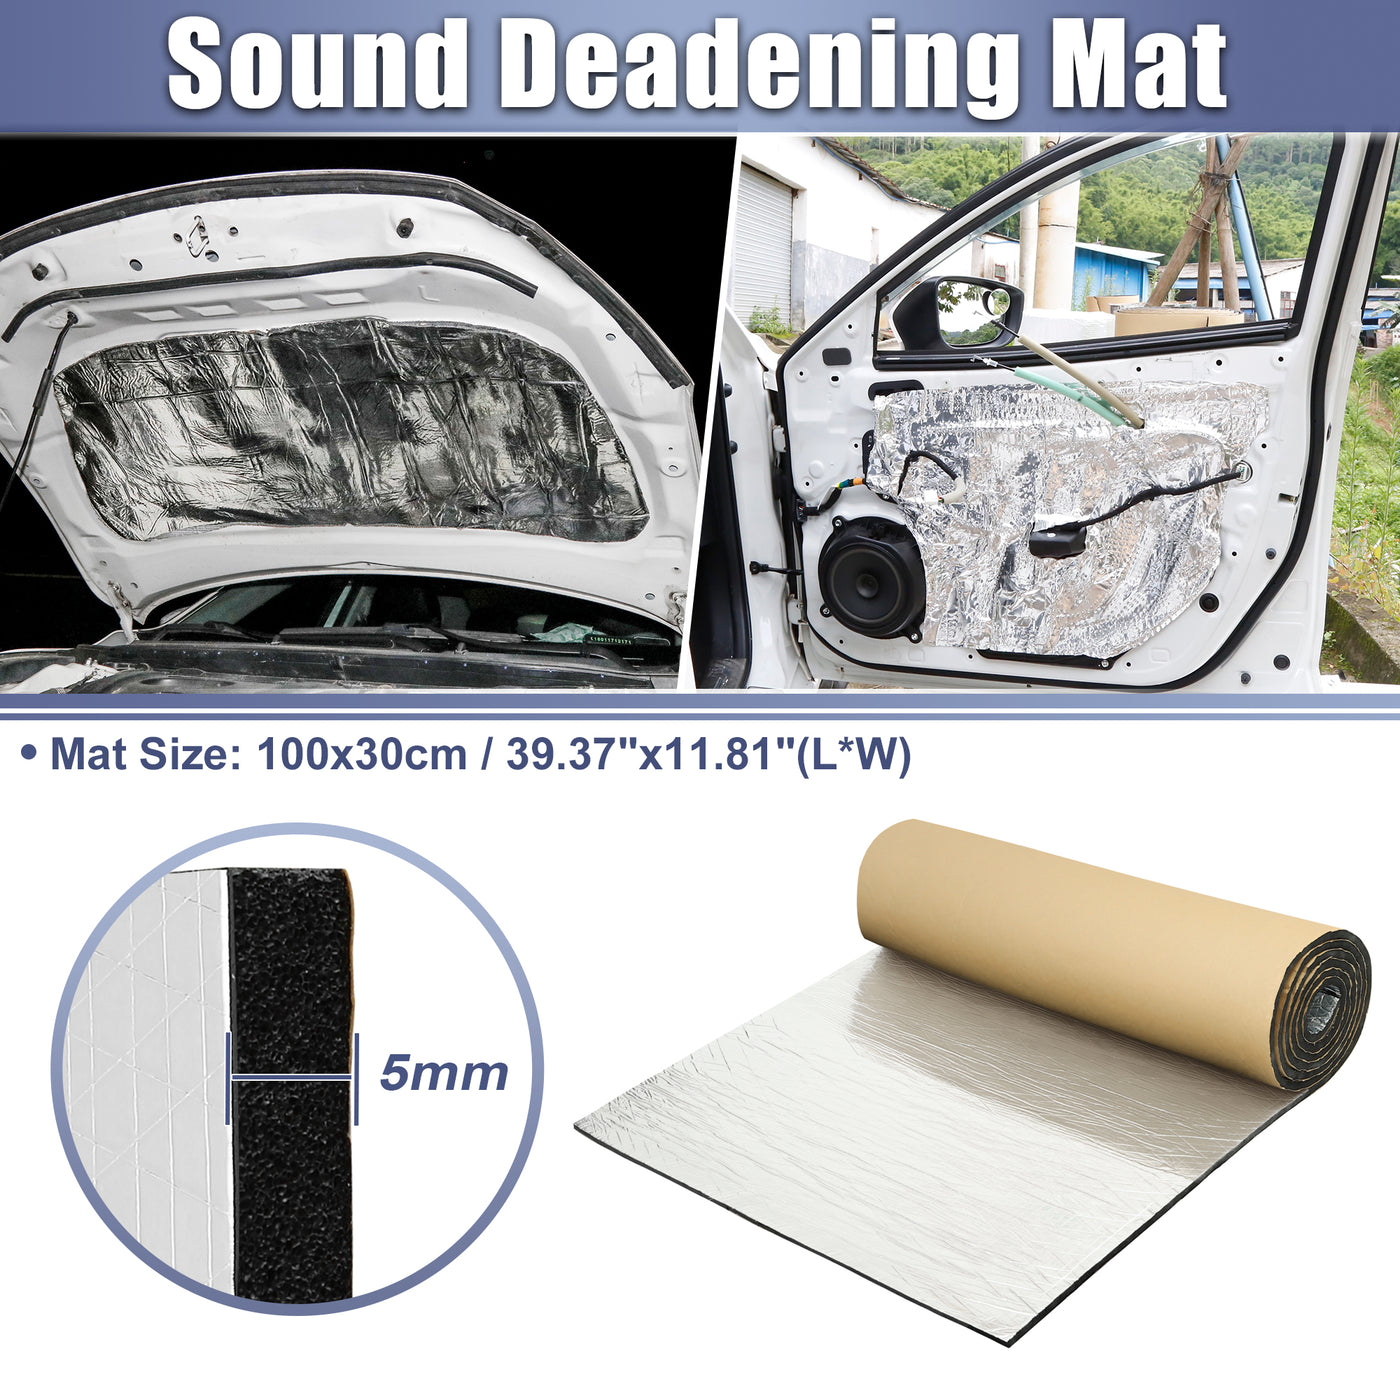 X AUTOHAUX 197mil 5mm 3.22sqft Car Sound Deadening Mat Aluminum Foil Closed Cell Foam Heat Shield Material Damping Self Adhesive Universal for Hood Fender and Boat Engine Cover 39.37"x11.81"